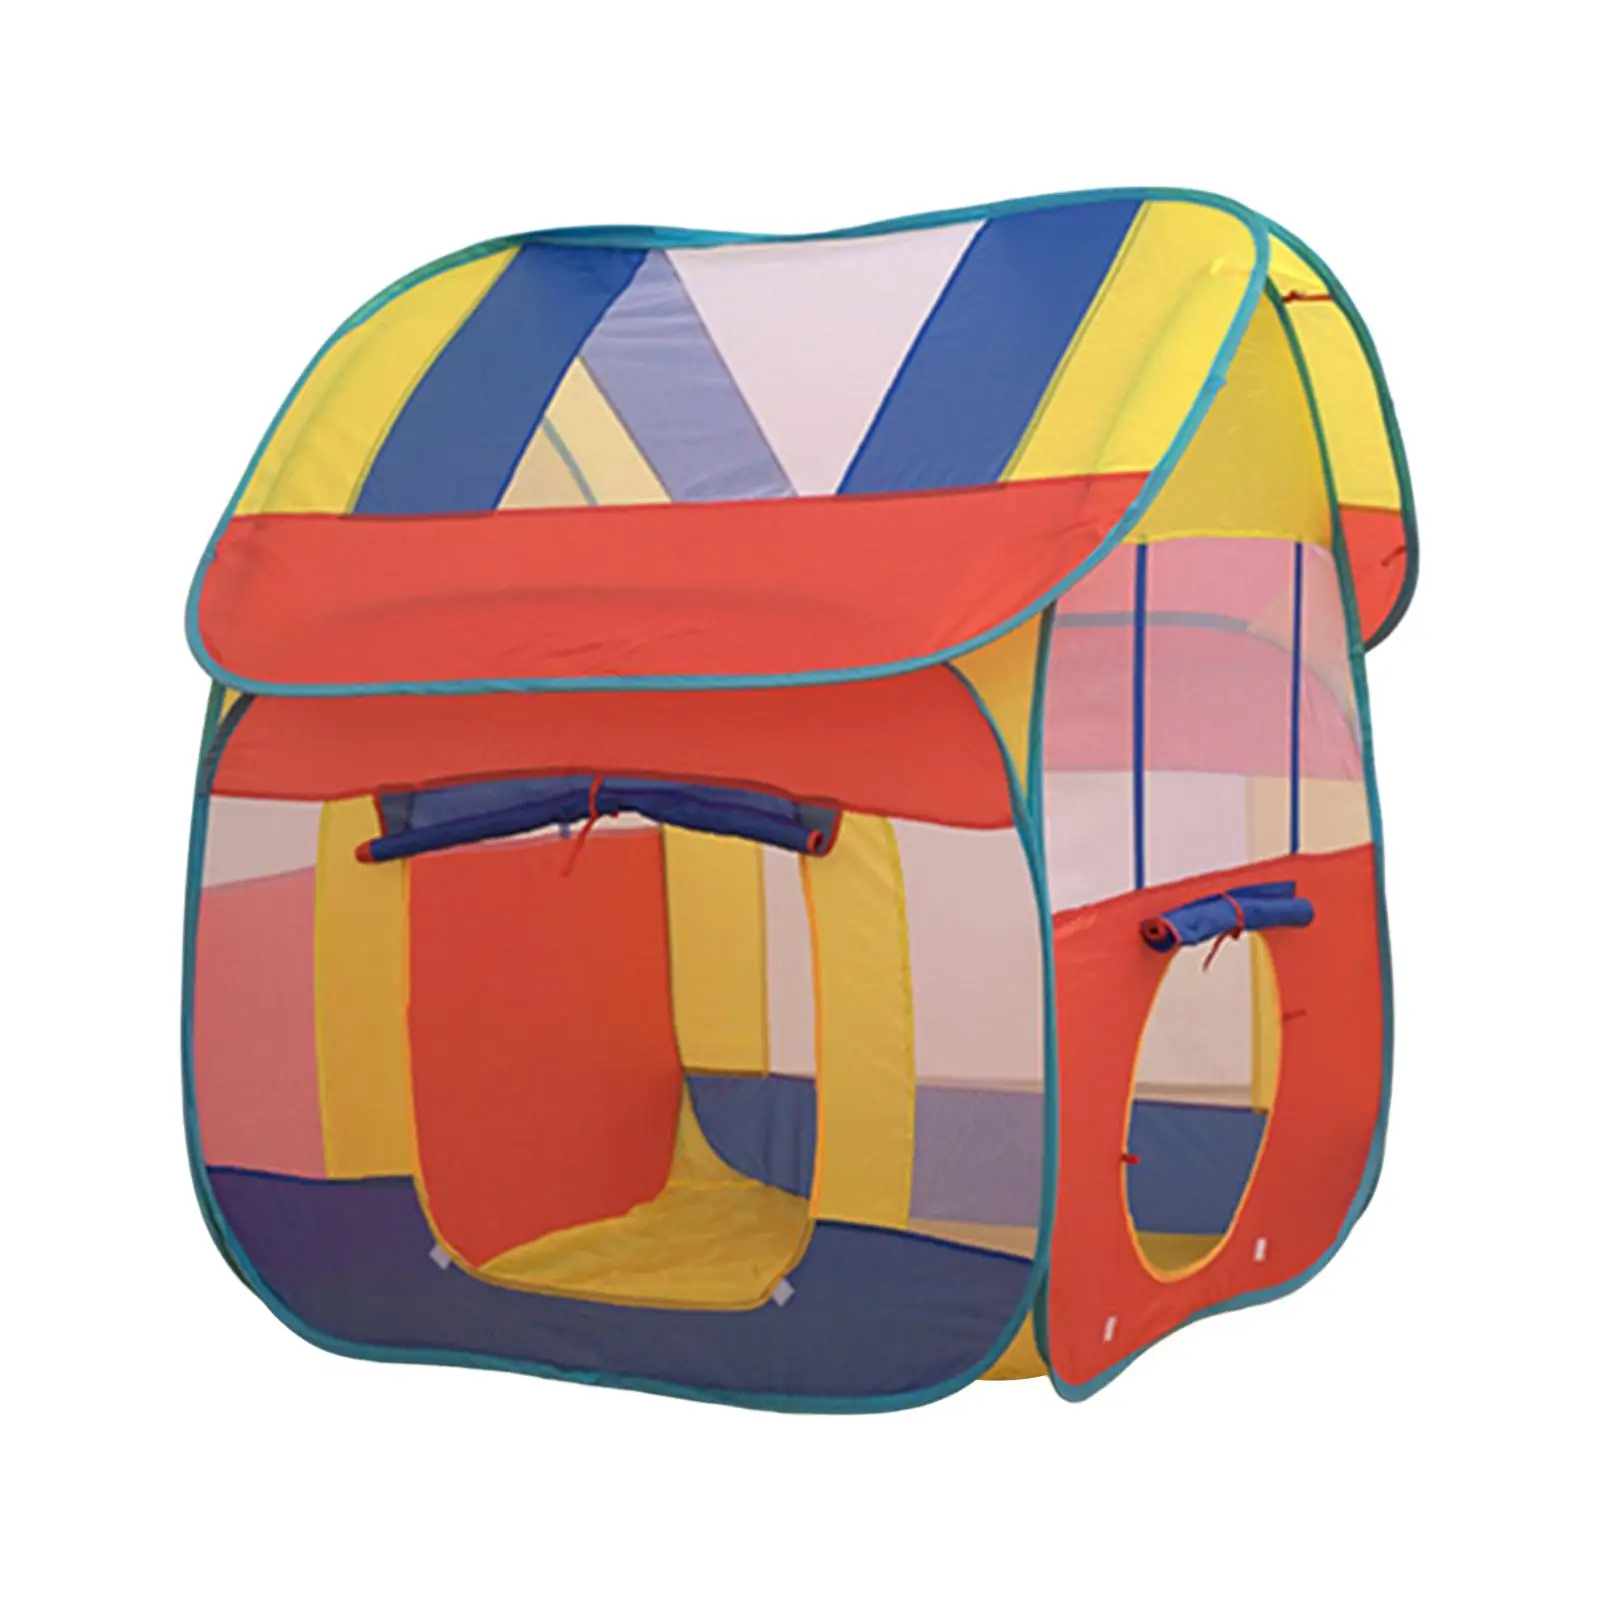 Kids Play Tent Gift Portable Foldable Kids Popup Tent Children Playhouse for Games Indoor Outdoor Camping Playground Kids